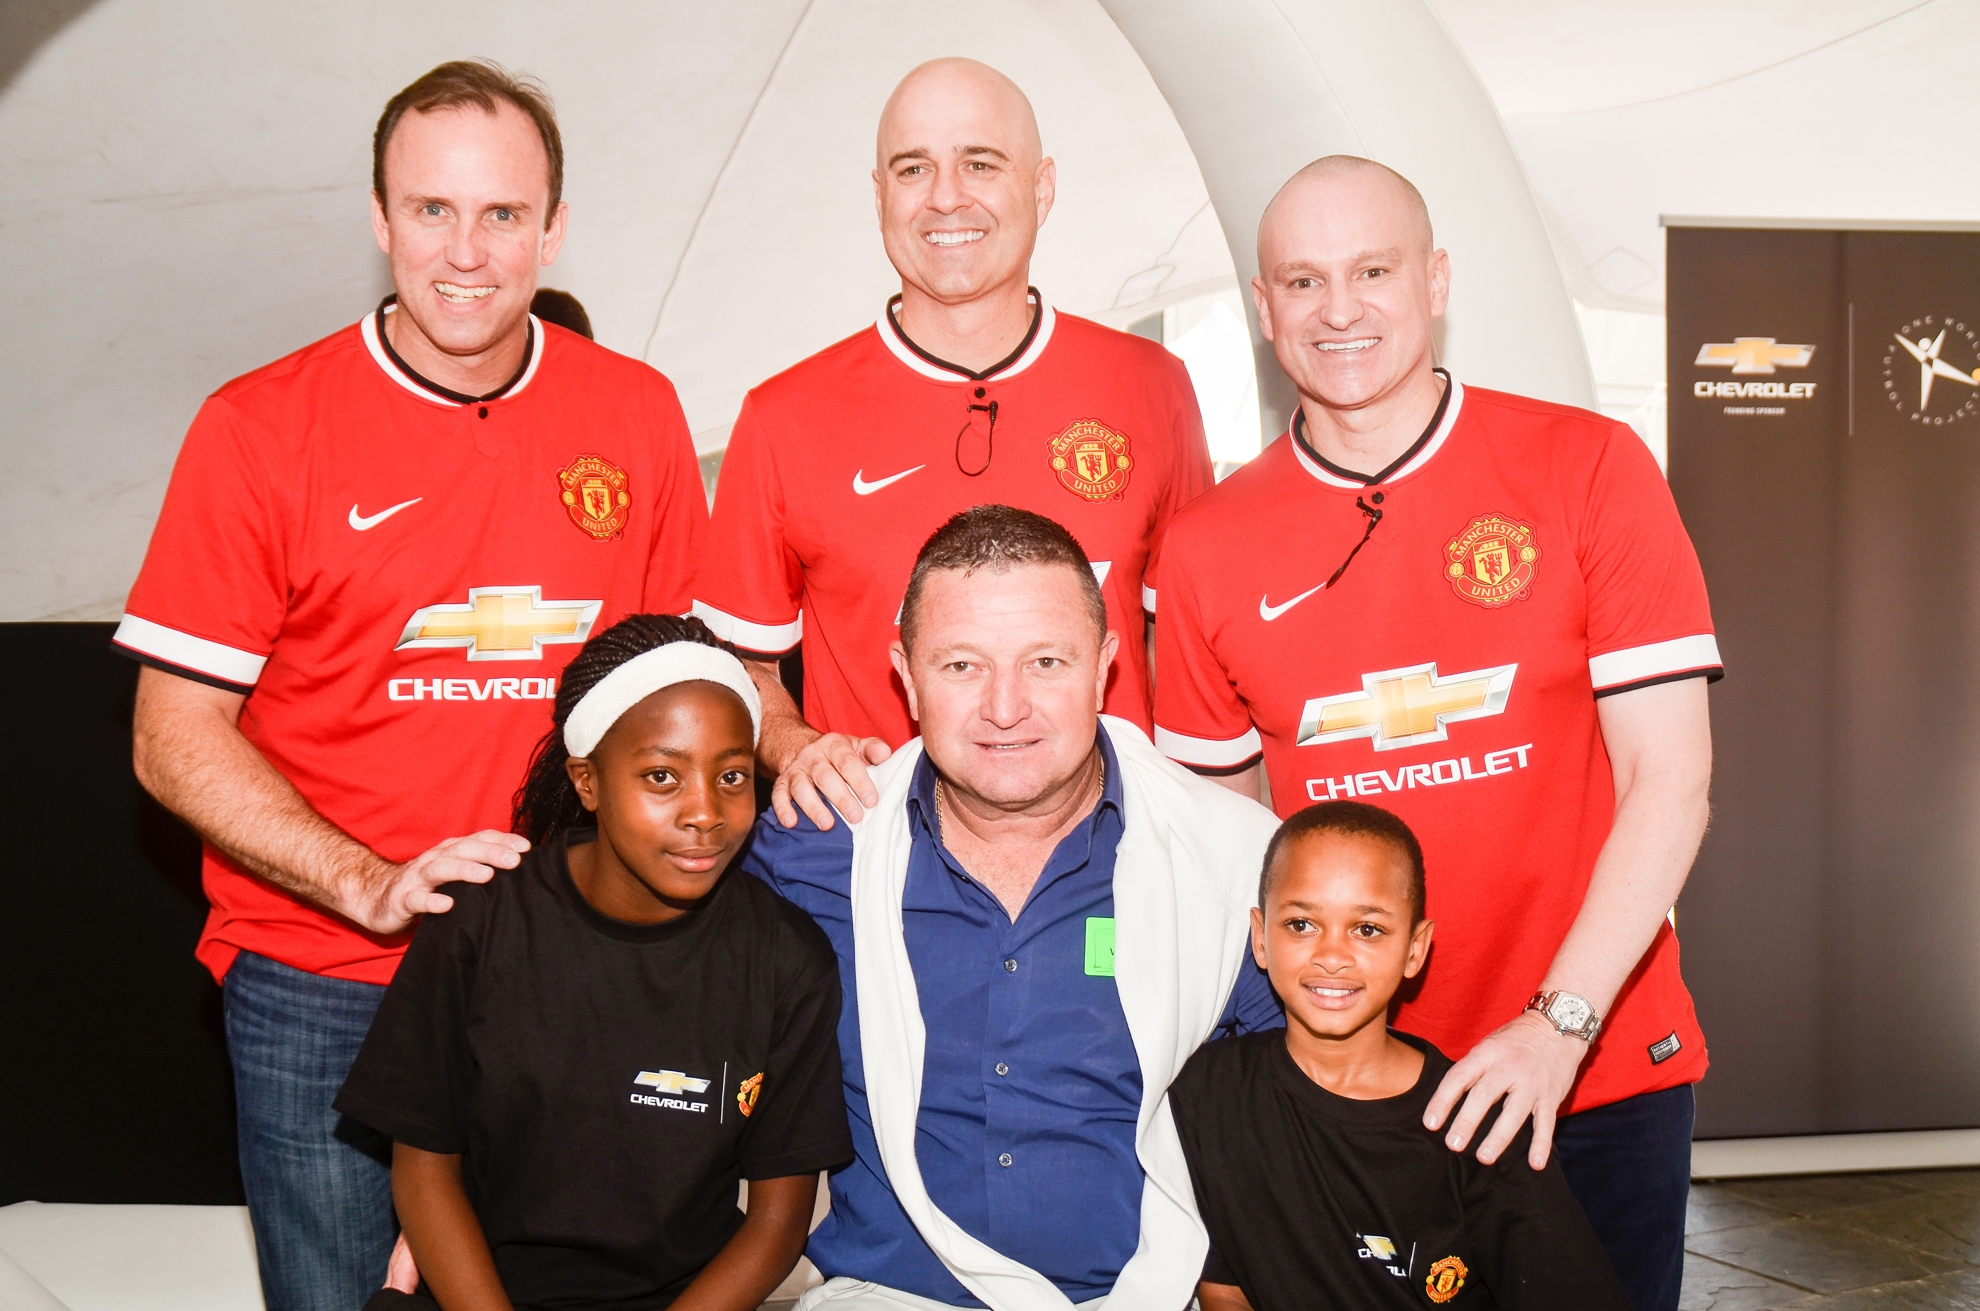 Chevrolet Manchester United mascots return from the trip of a lifetime